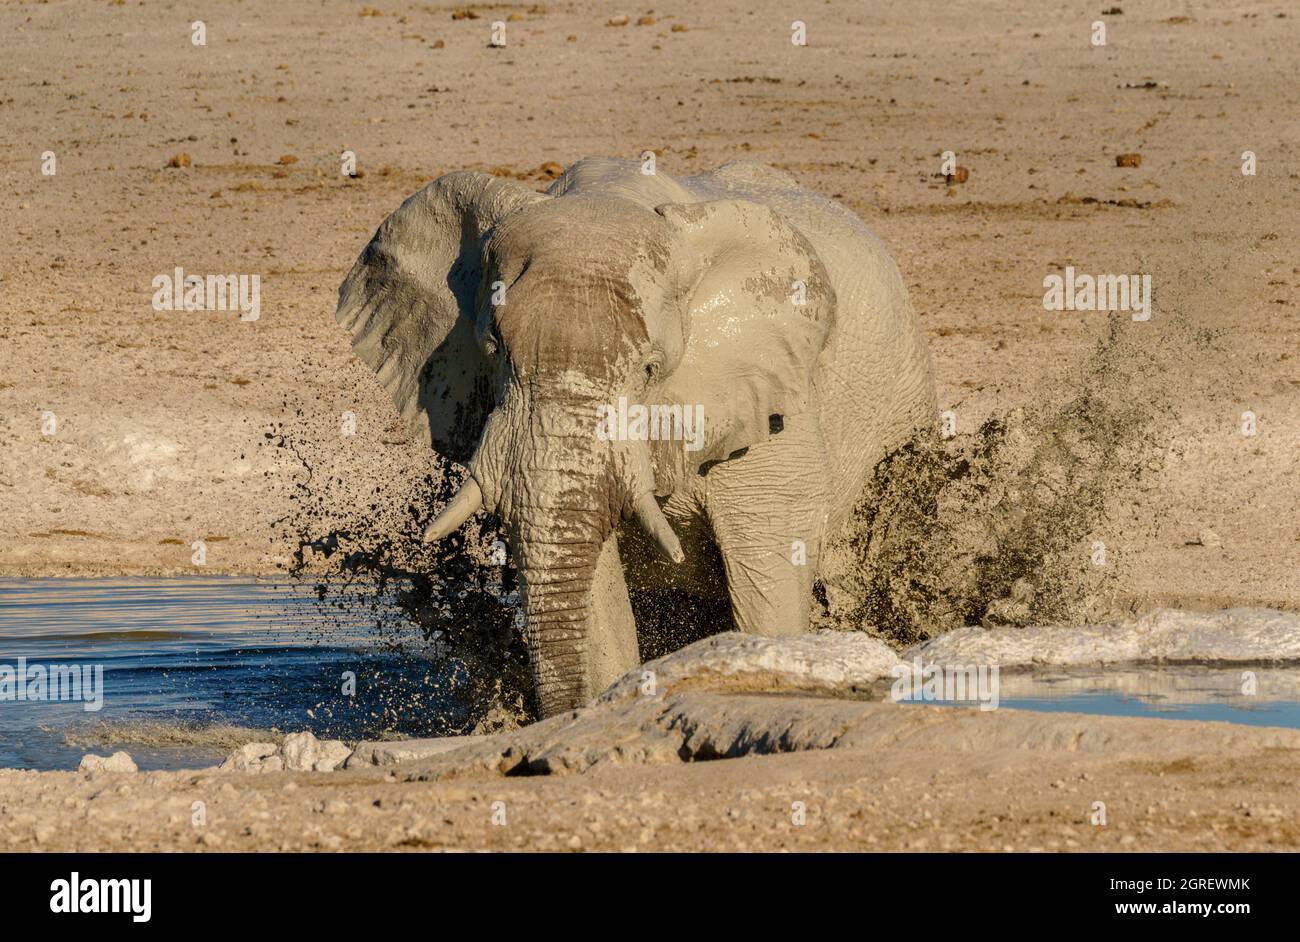 Elephant drinking and grooming at waterhole in Northern Namibia Stock Photo